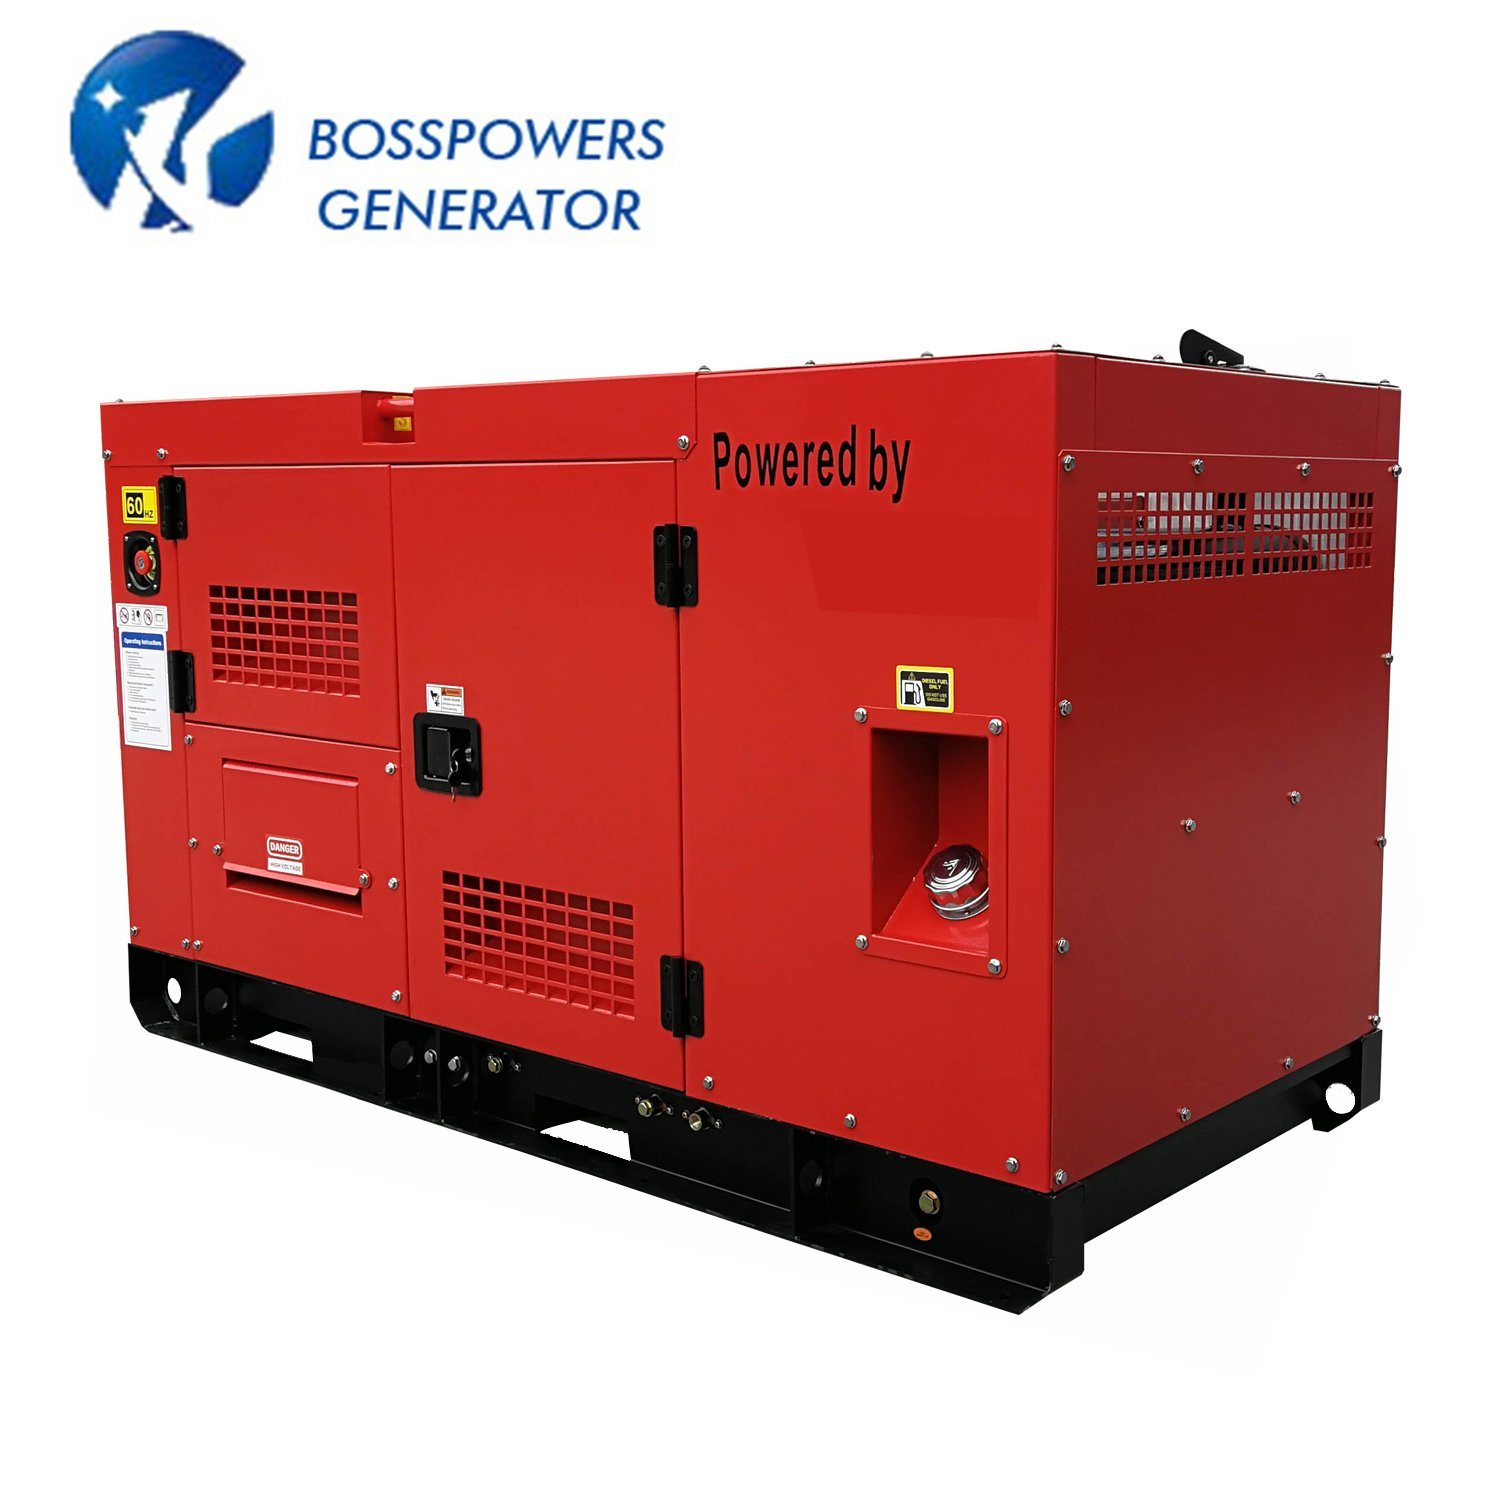 Powered by Yto 30kVA to 400kVA Soundproof Diesel Generator